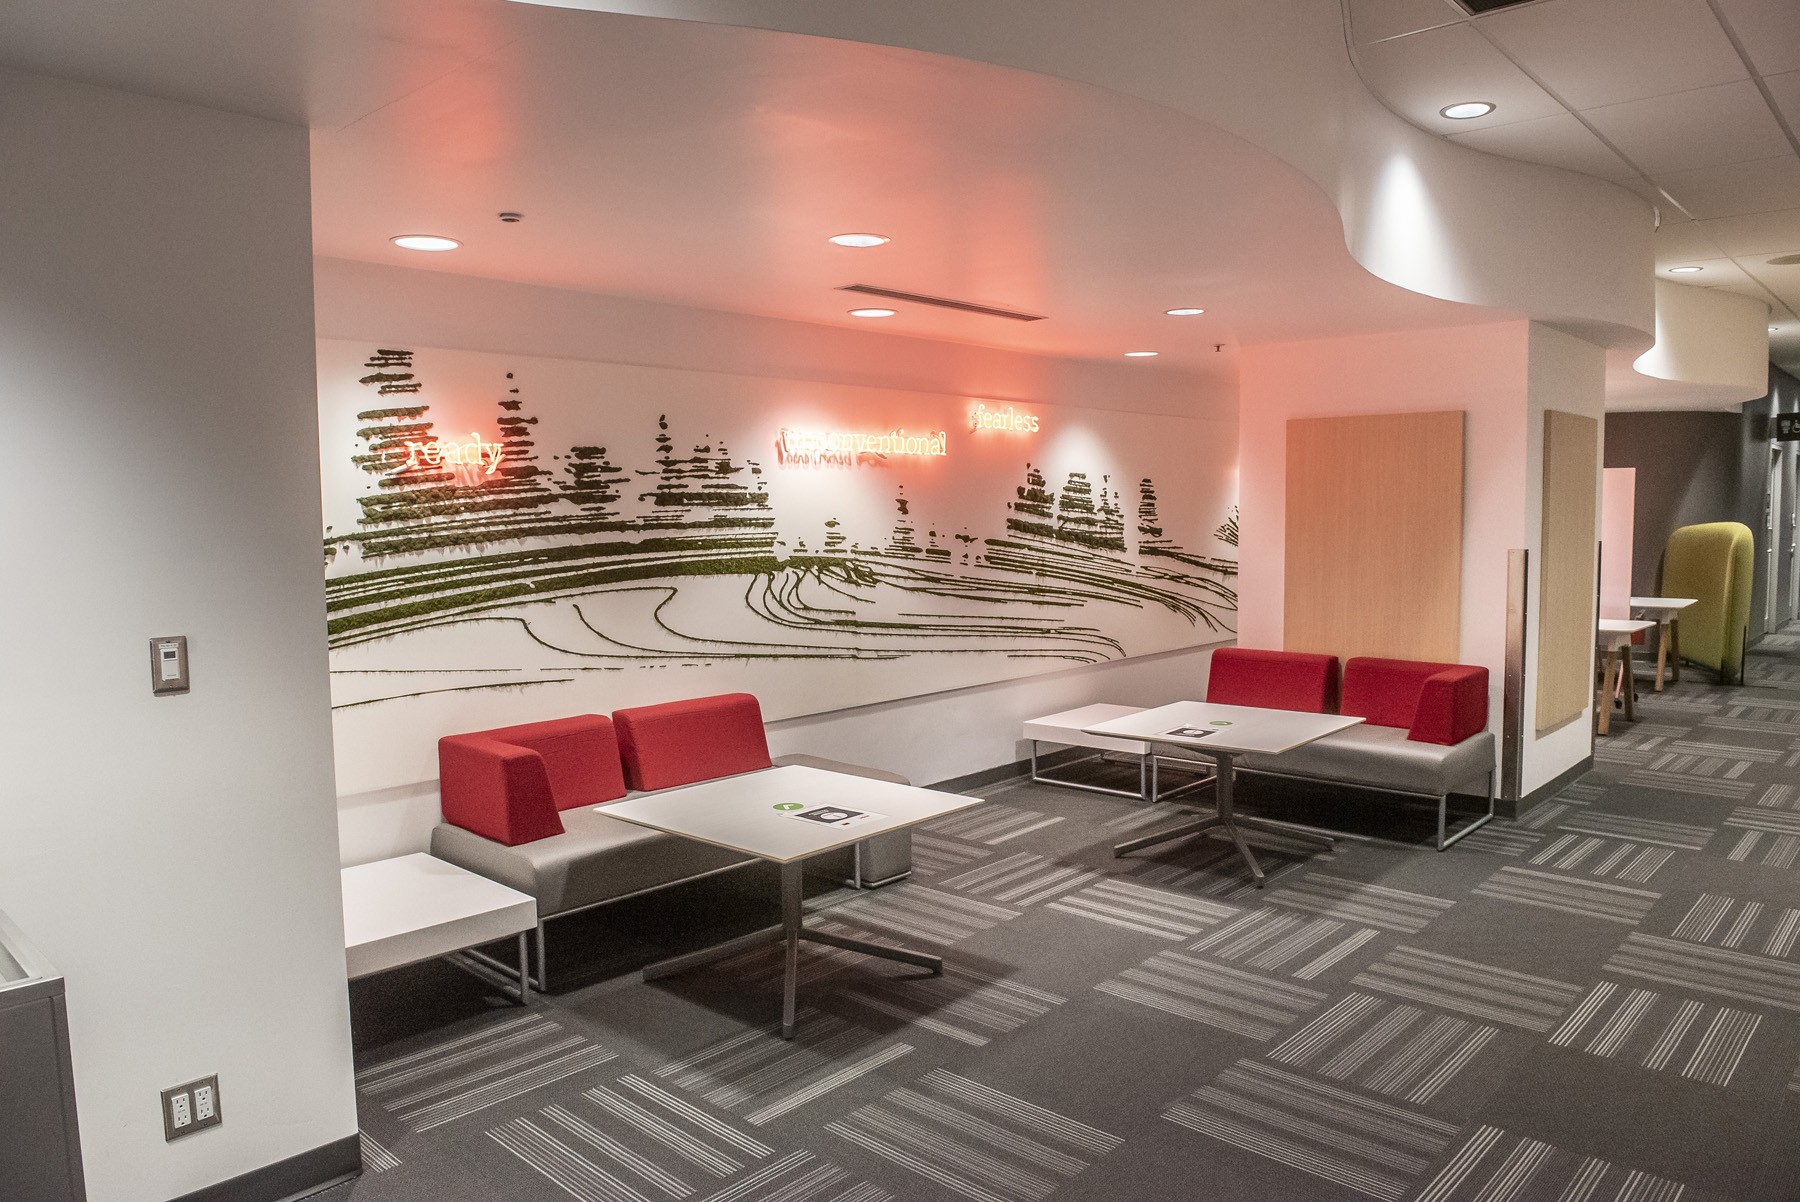 A study area at SFU's Harbour Centre campus. There are two red couches, each with a moveable table. A mural behind the couches depicts abstract black brush marks on a white background, resembling trees, with the words "ready", "unconventional" and "fearless" in red neon lights.